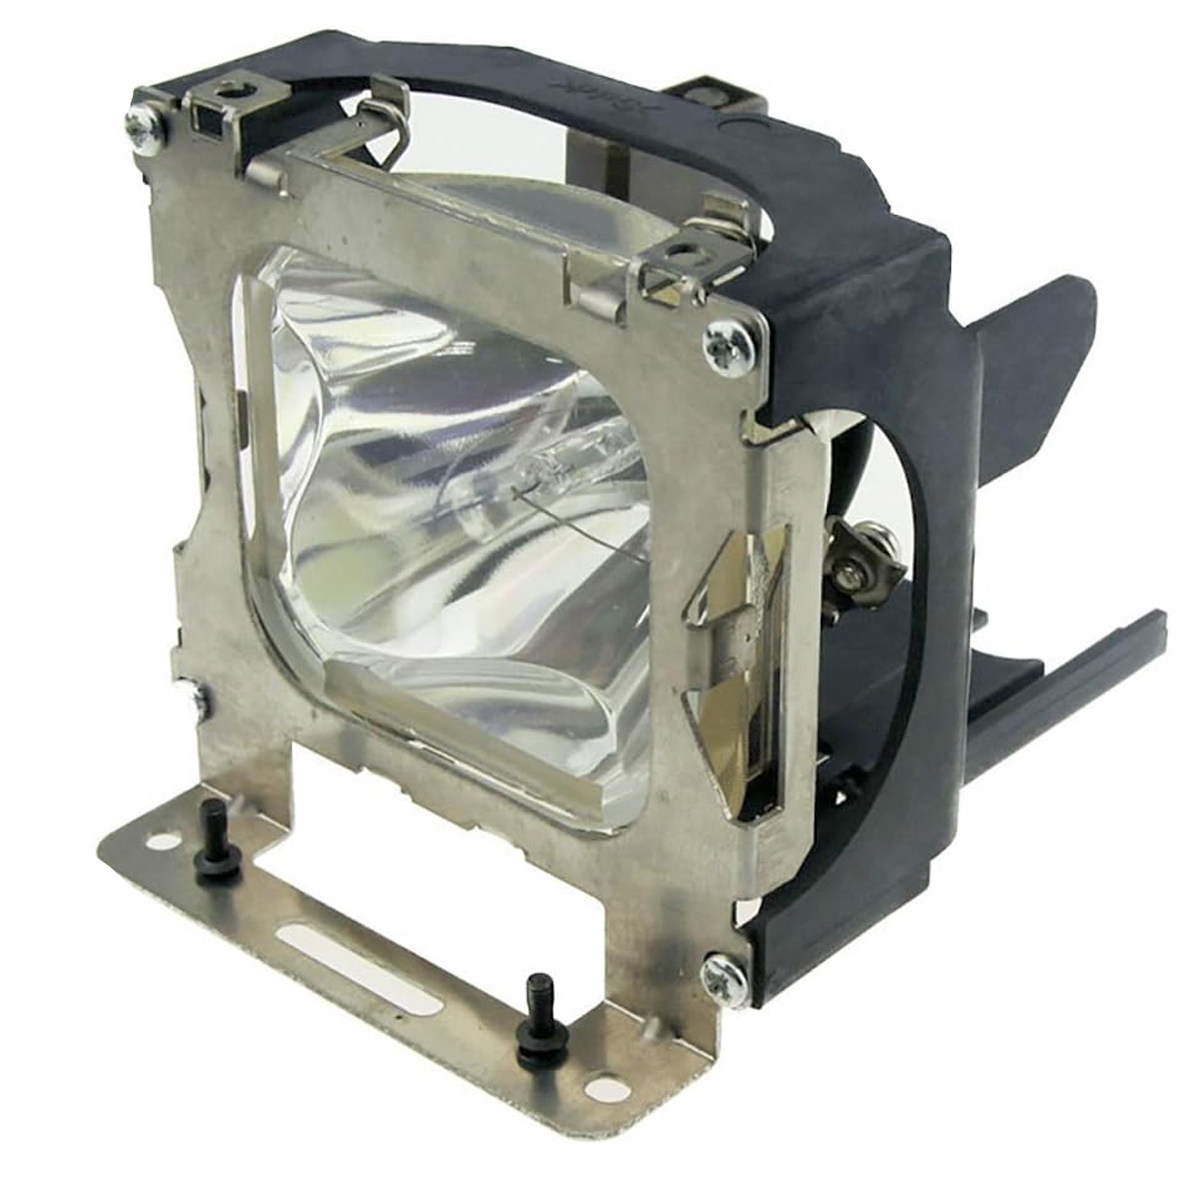 Replacement Projector lamp DT00231 For Hitachi CP-S860 CP-S958 CP-S960 CP-S970